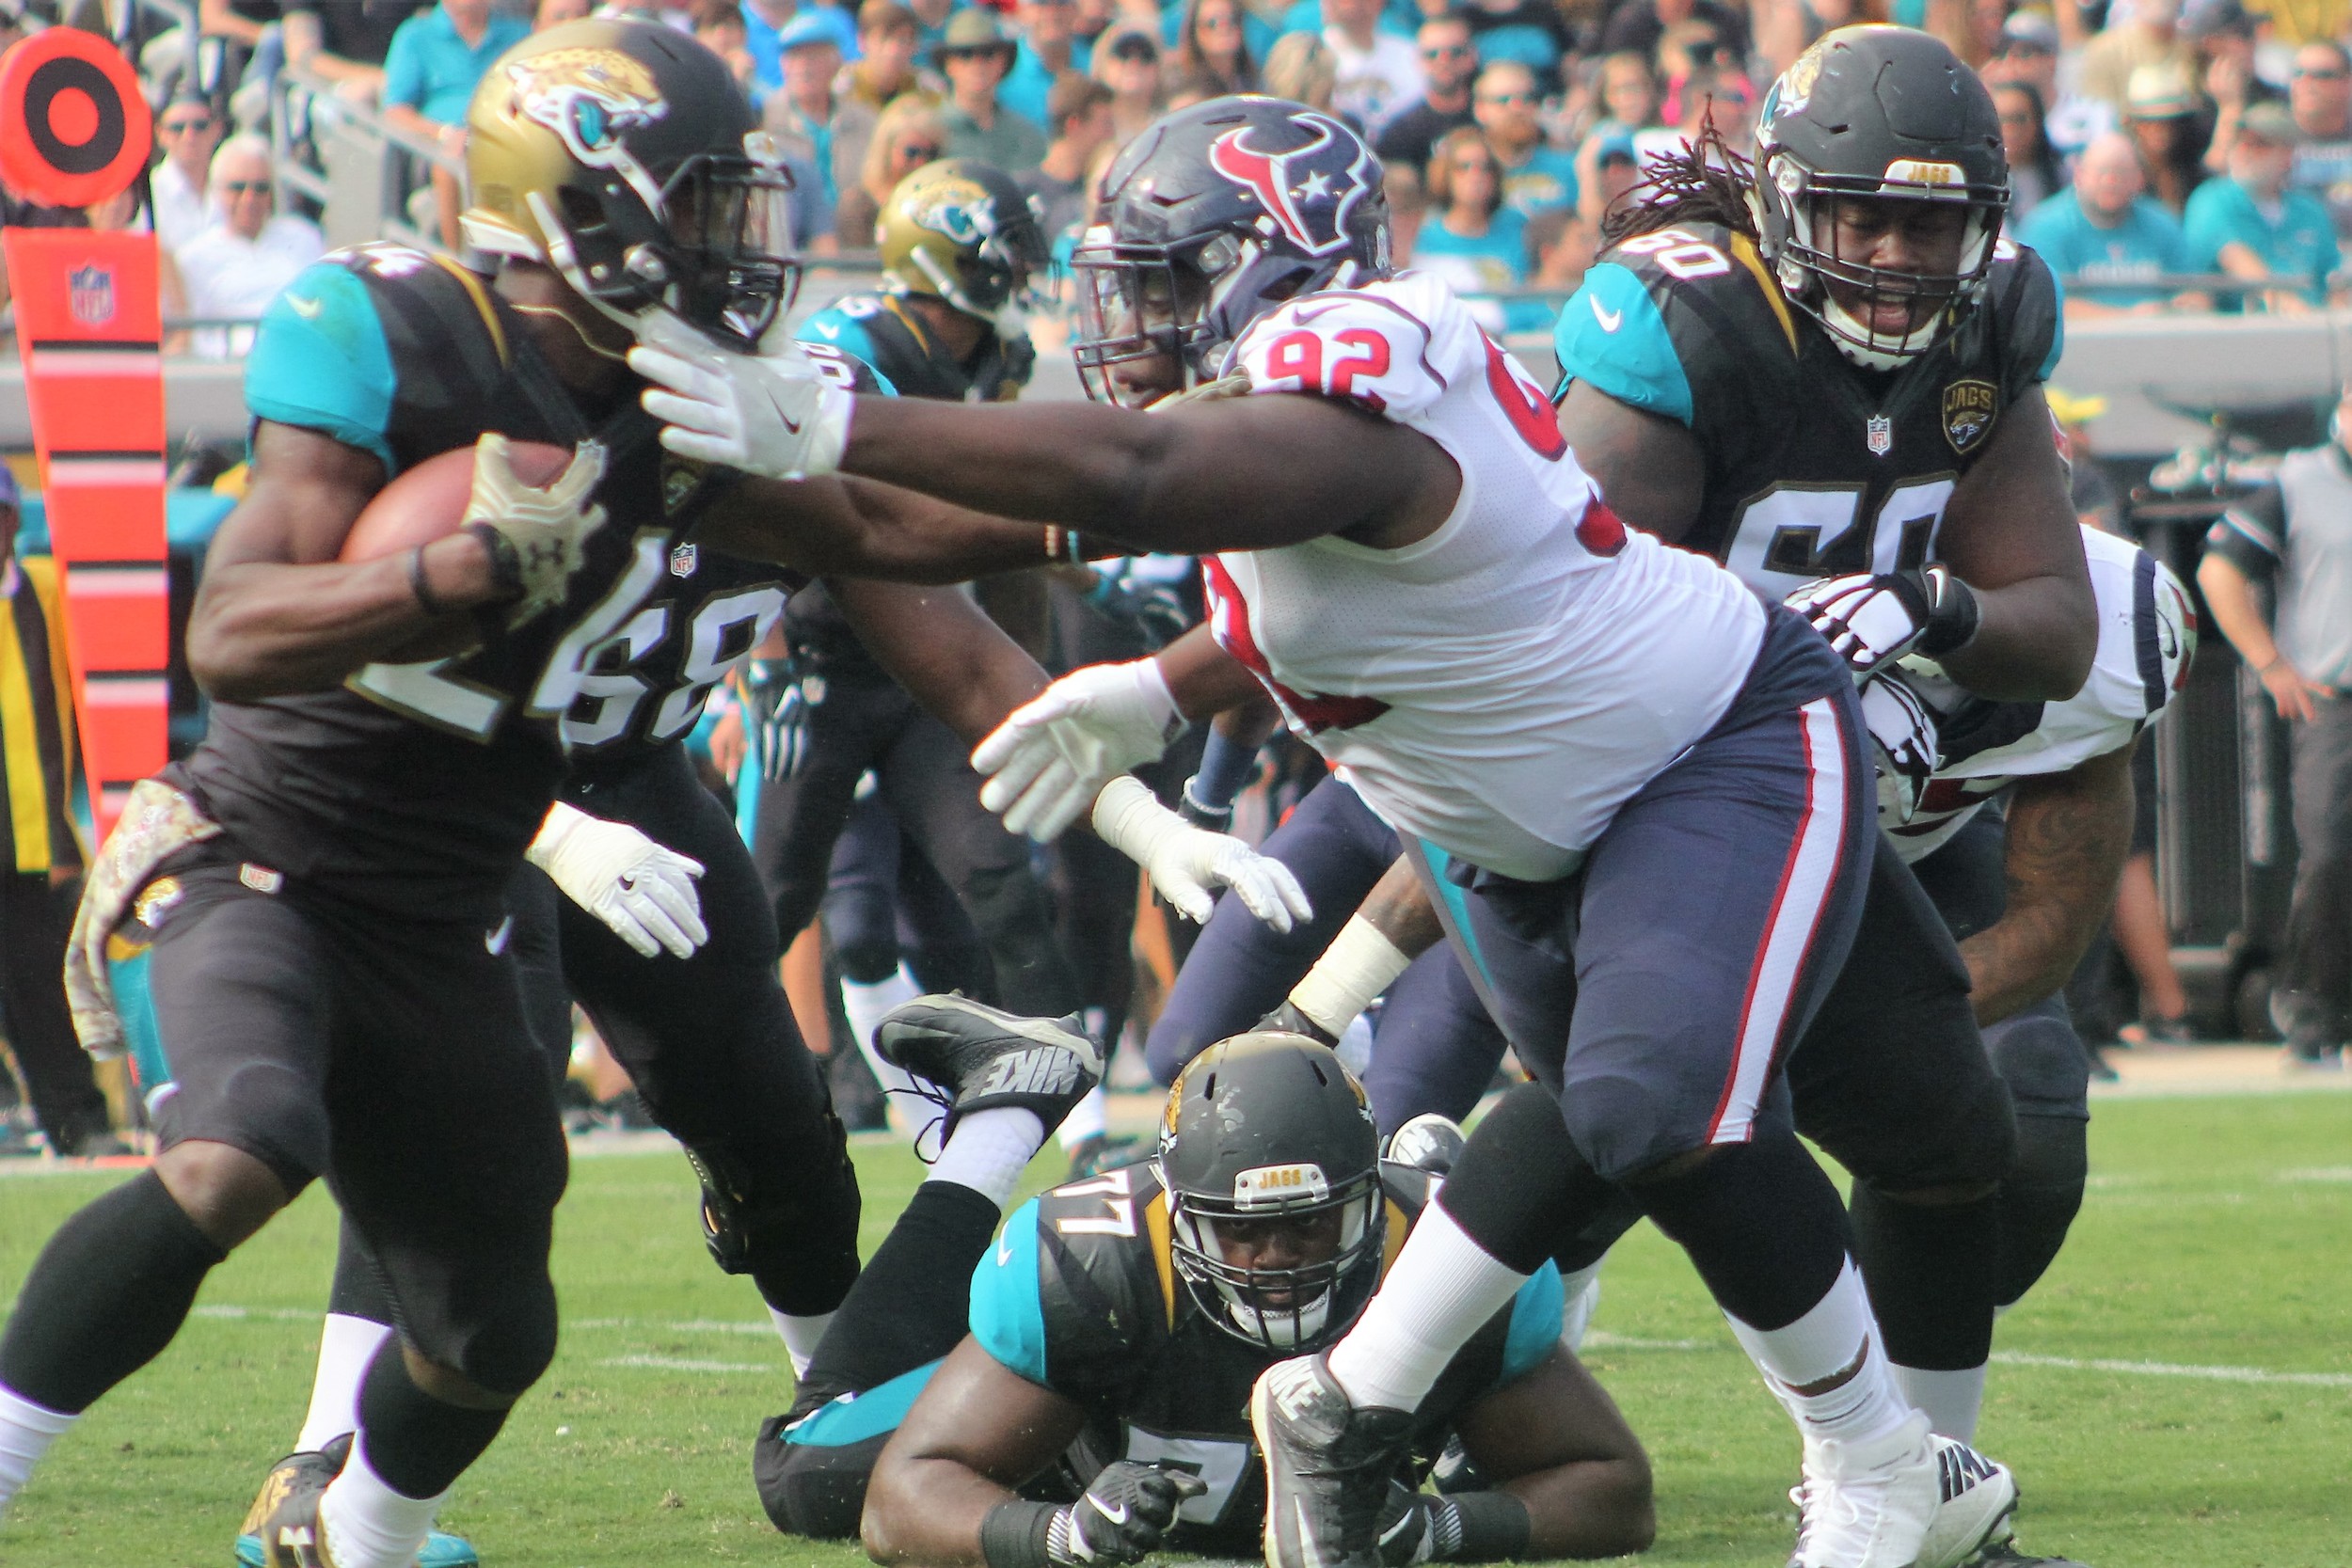 Jacksonville running back T.J. Yeldon (24) rushed nine times for 32 yards and caught 3-of-3 targets for 27 yards in the Jaguars' loss to the Texans.